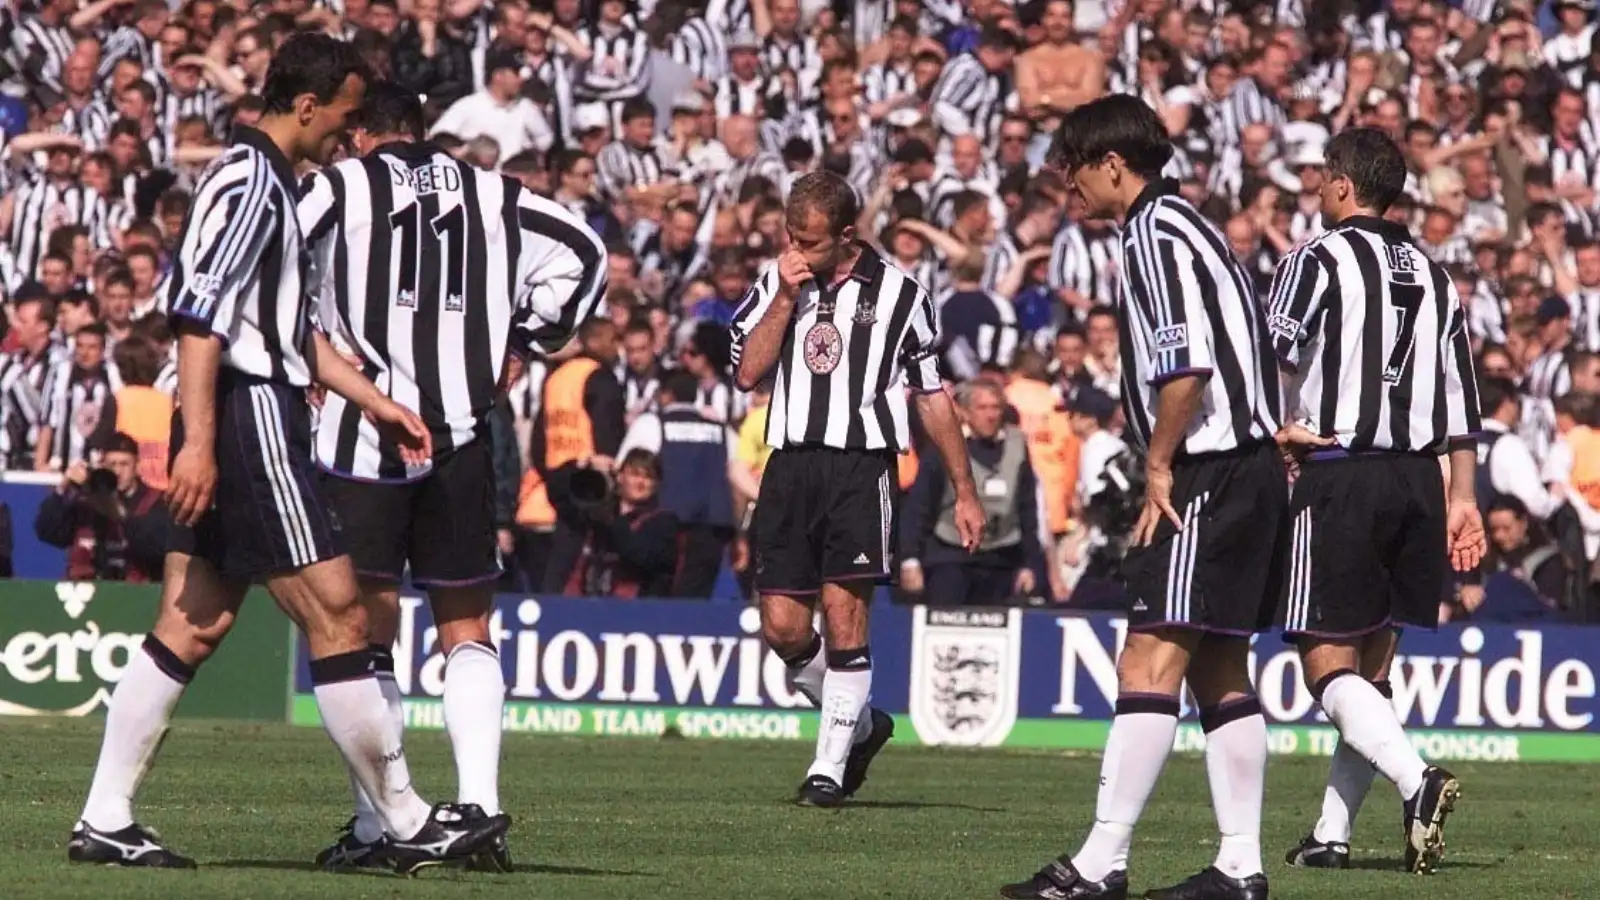 Can you name Newcastle’s starting XI from the 1999 FA Cup final?